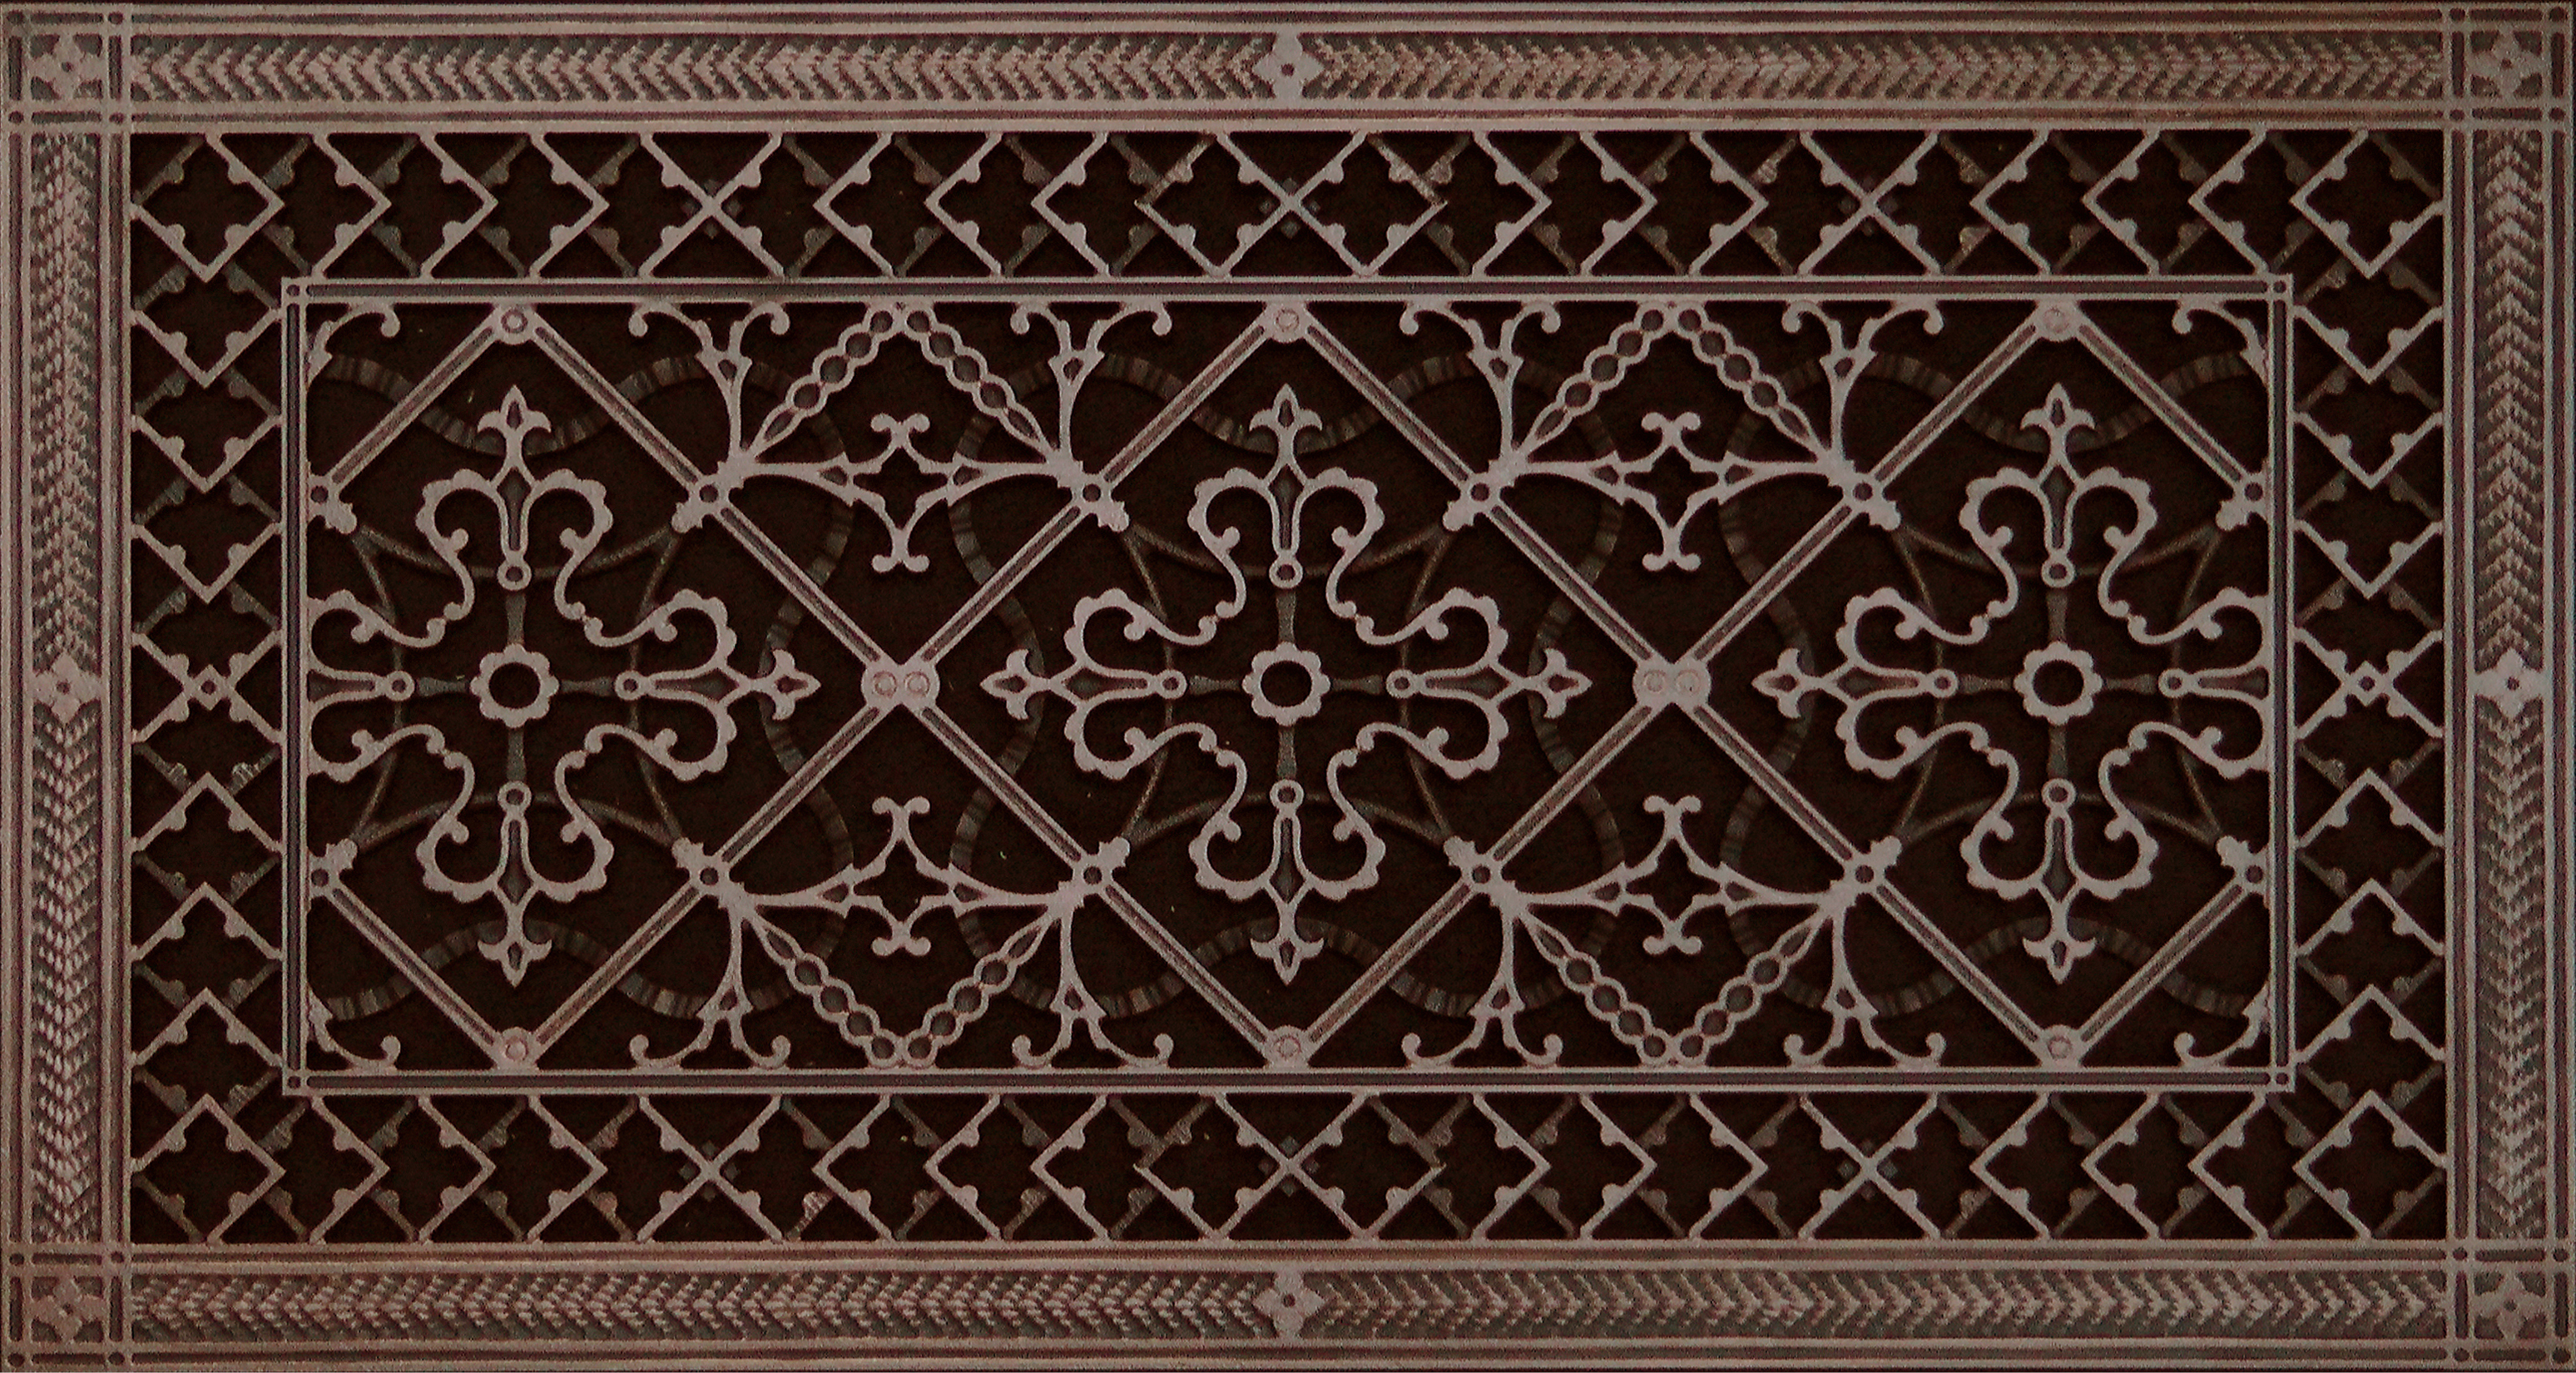 Decorative Vent Cover in Arts and Crafts Style 12" x 24"